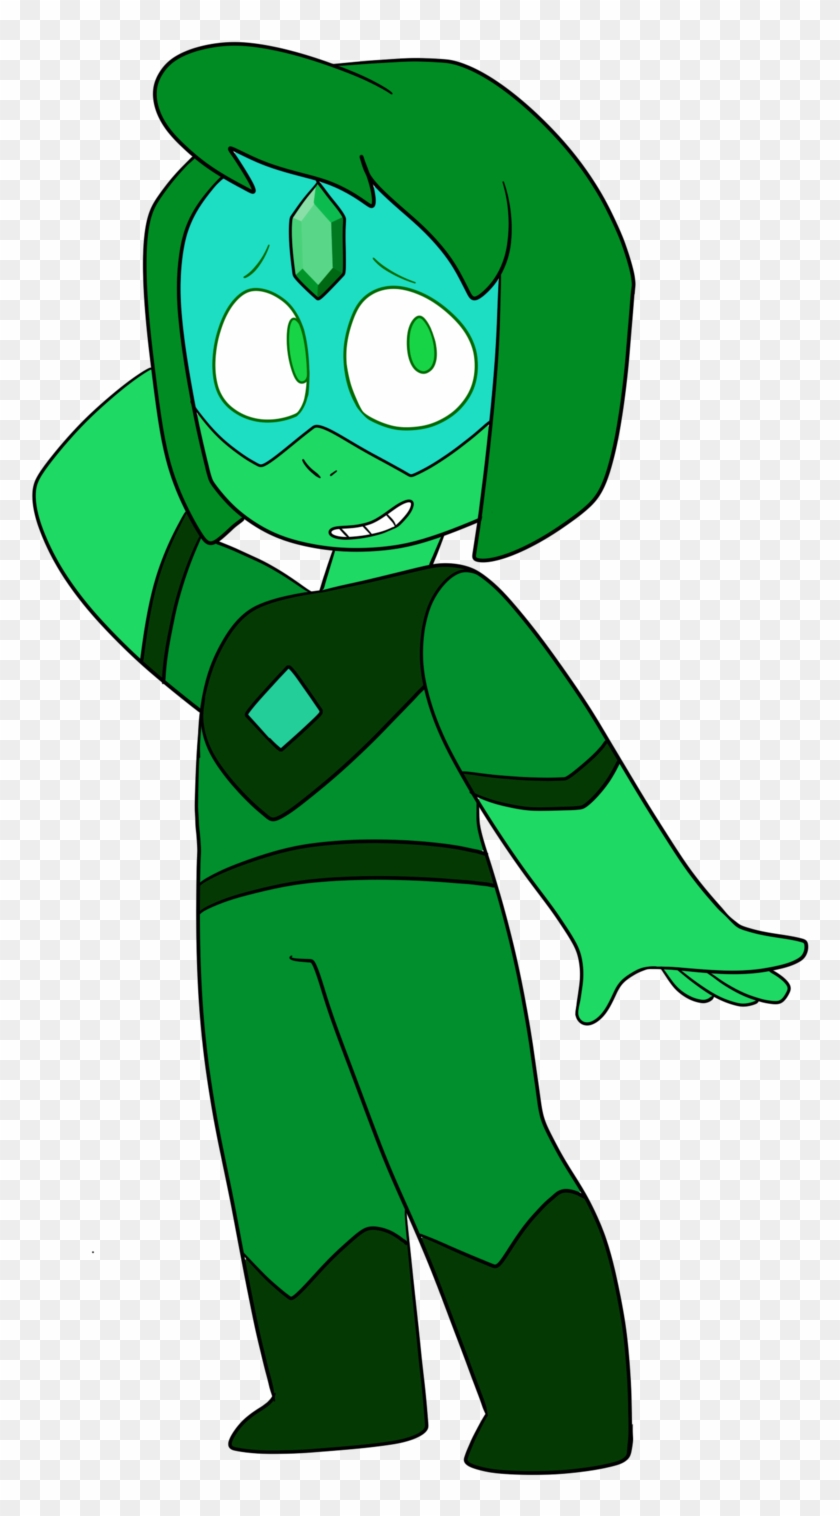 Emerald Gems Tend To Be Trouble Makers, And As A Team - Emerald Gems Tend To Be Trouble Makers, And As A Team #1546050